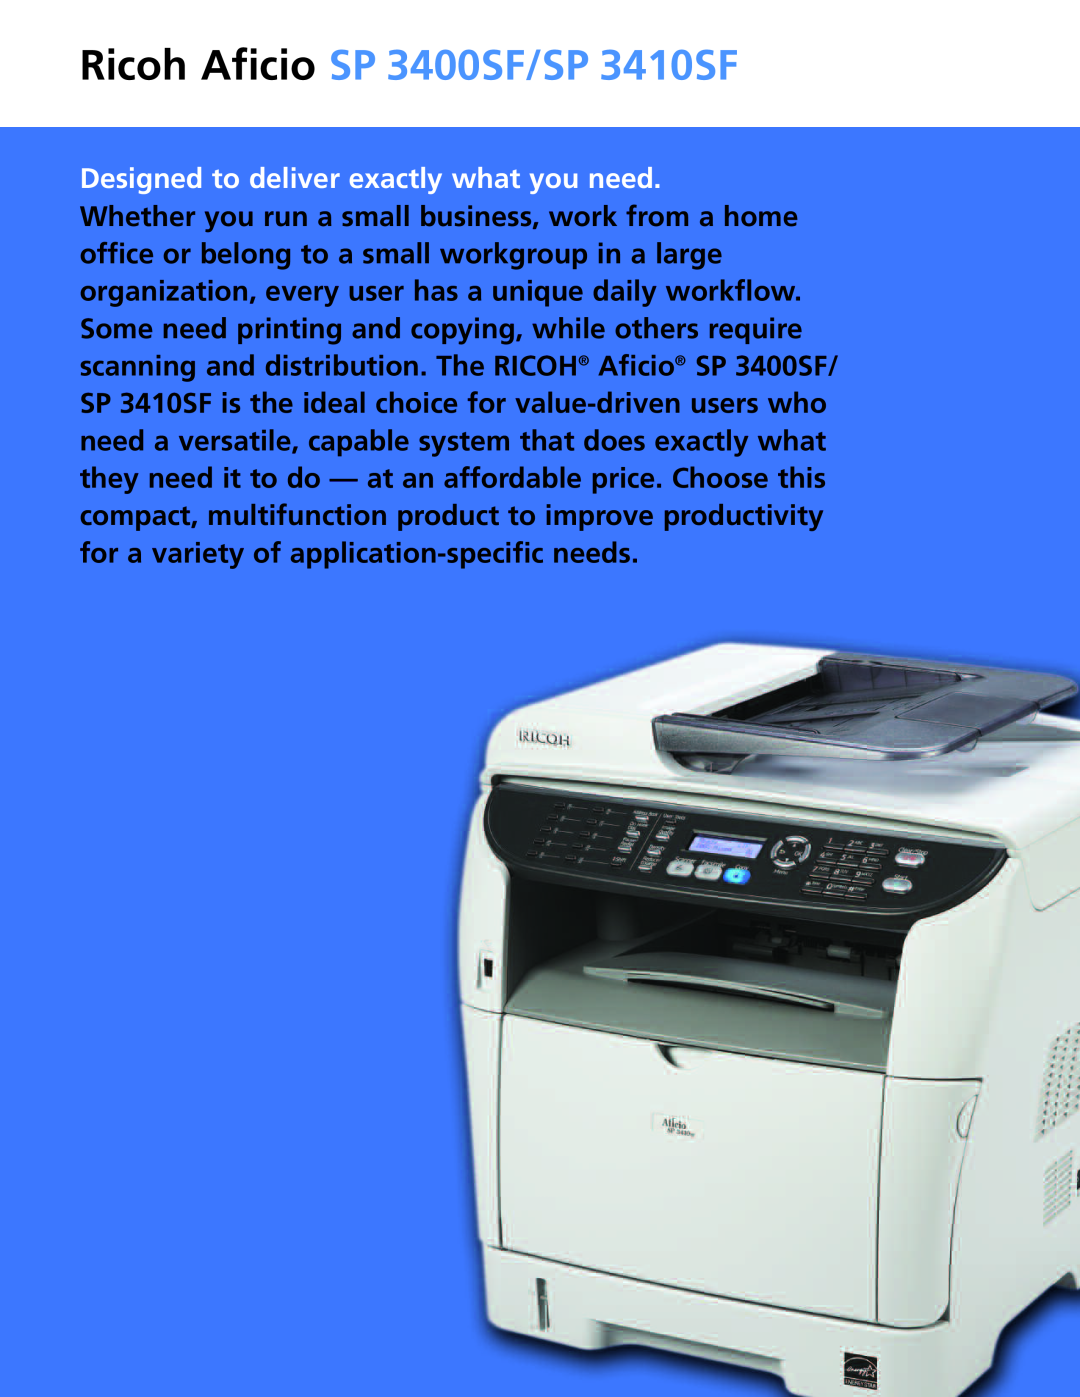 Ricoh manual Ricoh Aficio SP 3400SF/SP 3410SF, Designed to deliver exactly what you need 